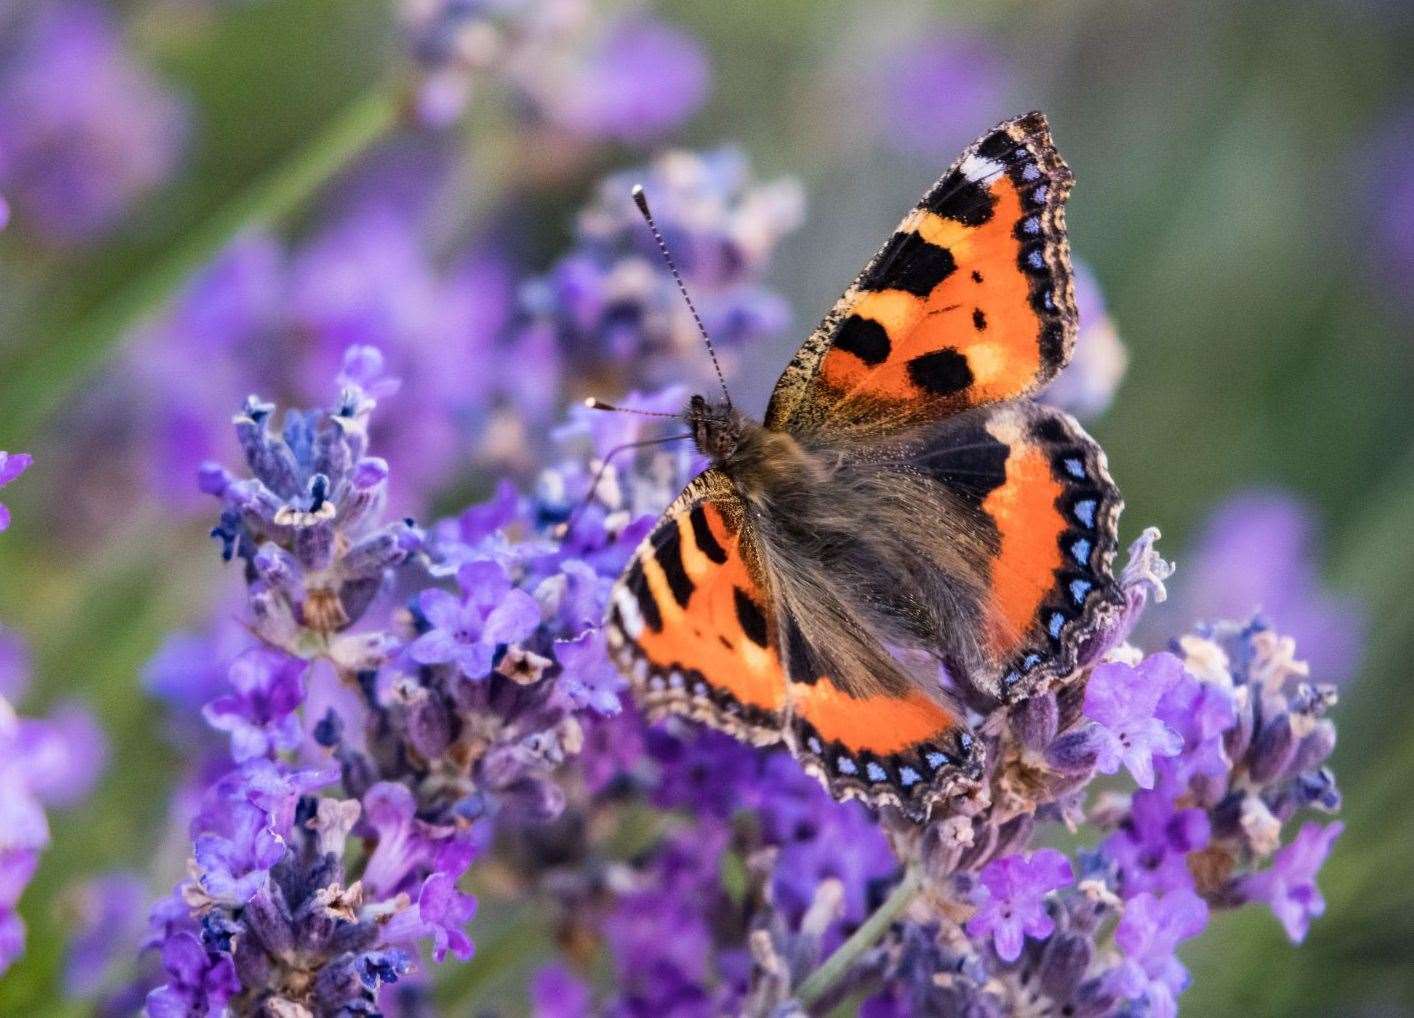 Conservationists are appealing to people to help with a butterfly count. Image: iStock.